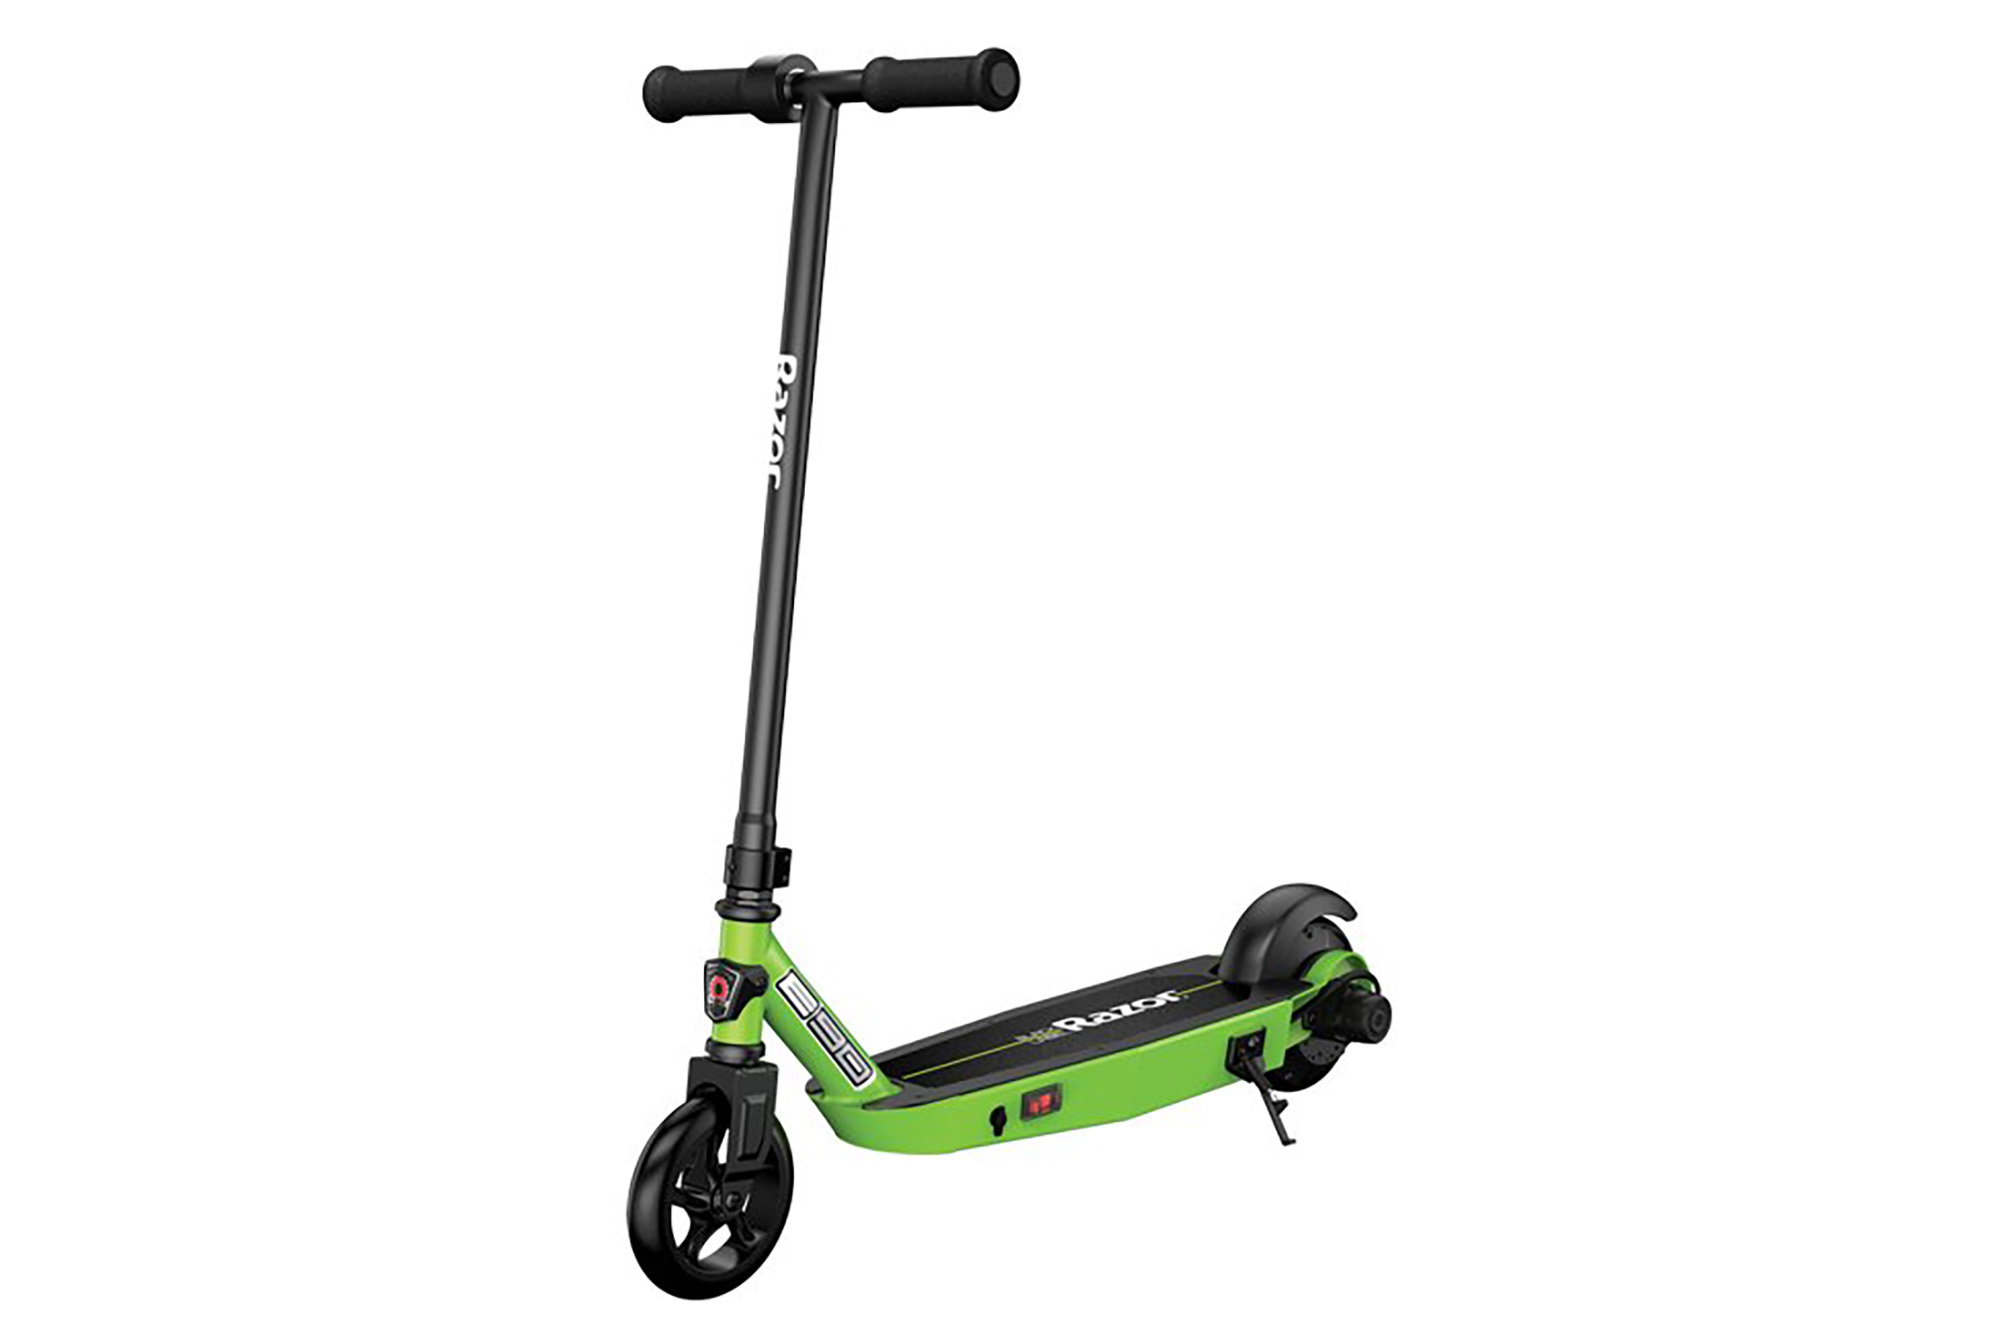 A green Razor scooter 